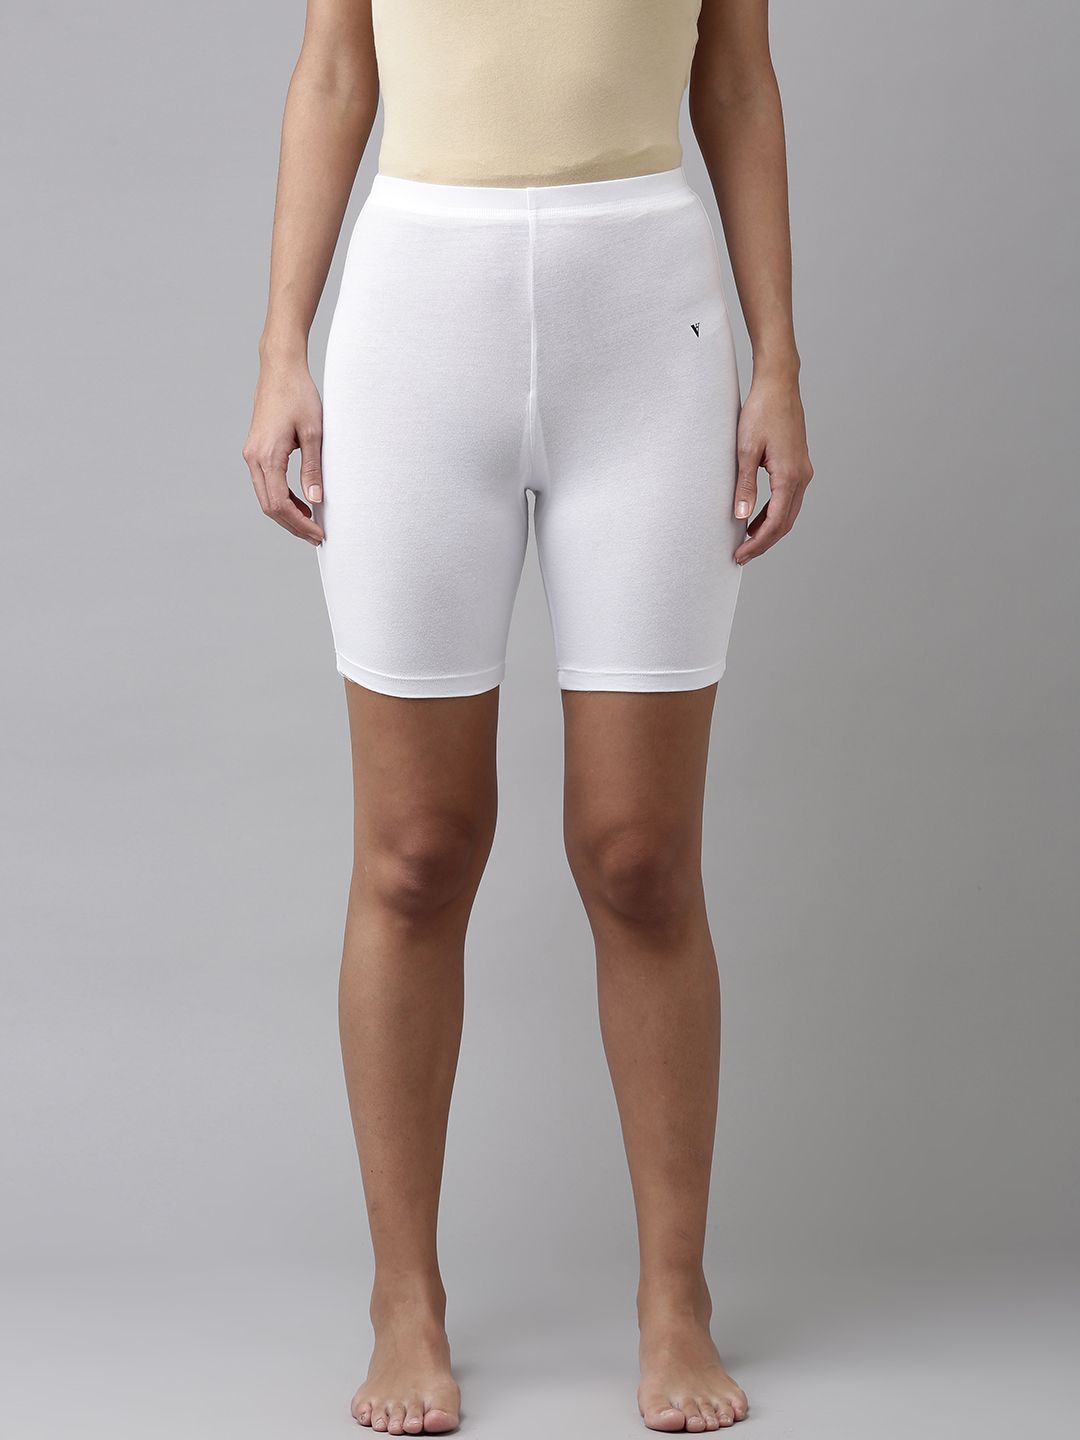 Van Heusen Women White Solid Cycling Shorts Price in India